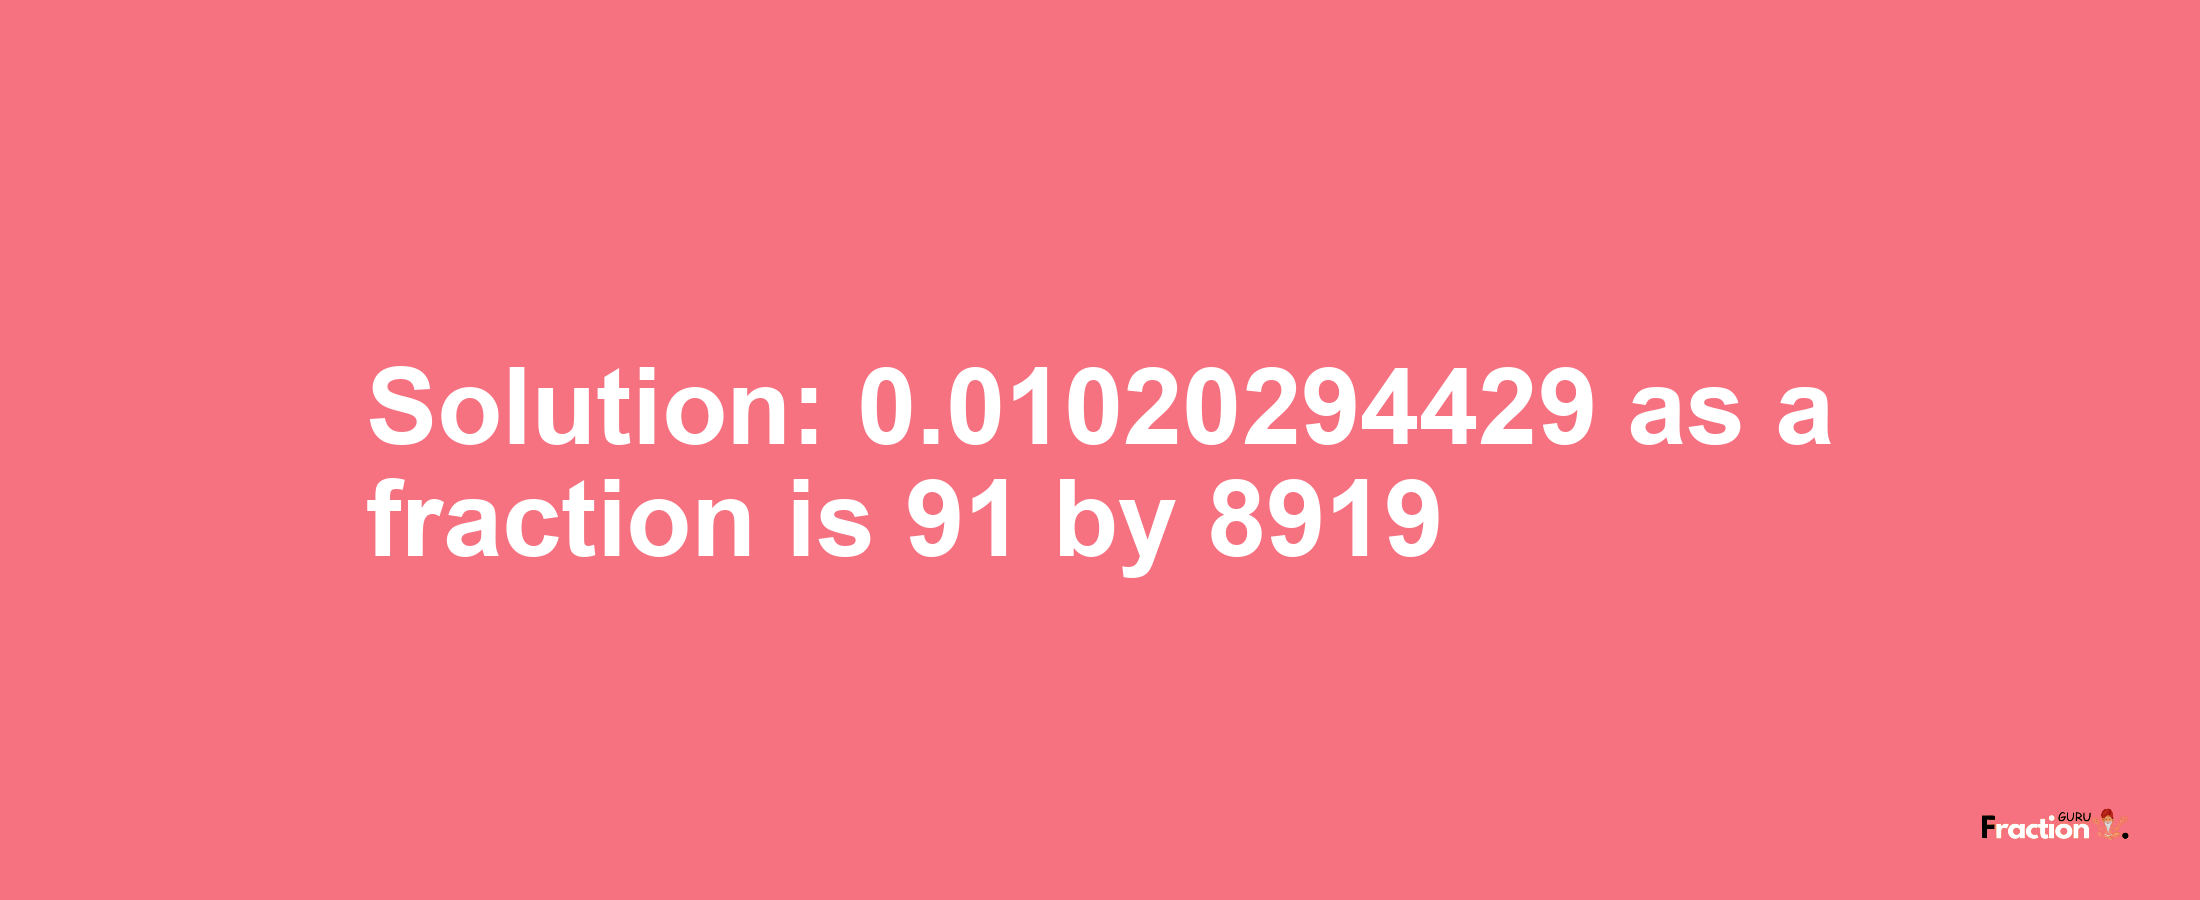 Solution:0.01020294429 as a fraction is 91/8919